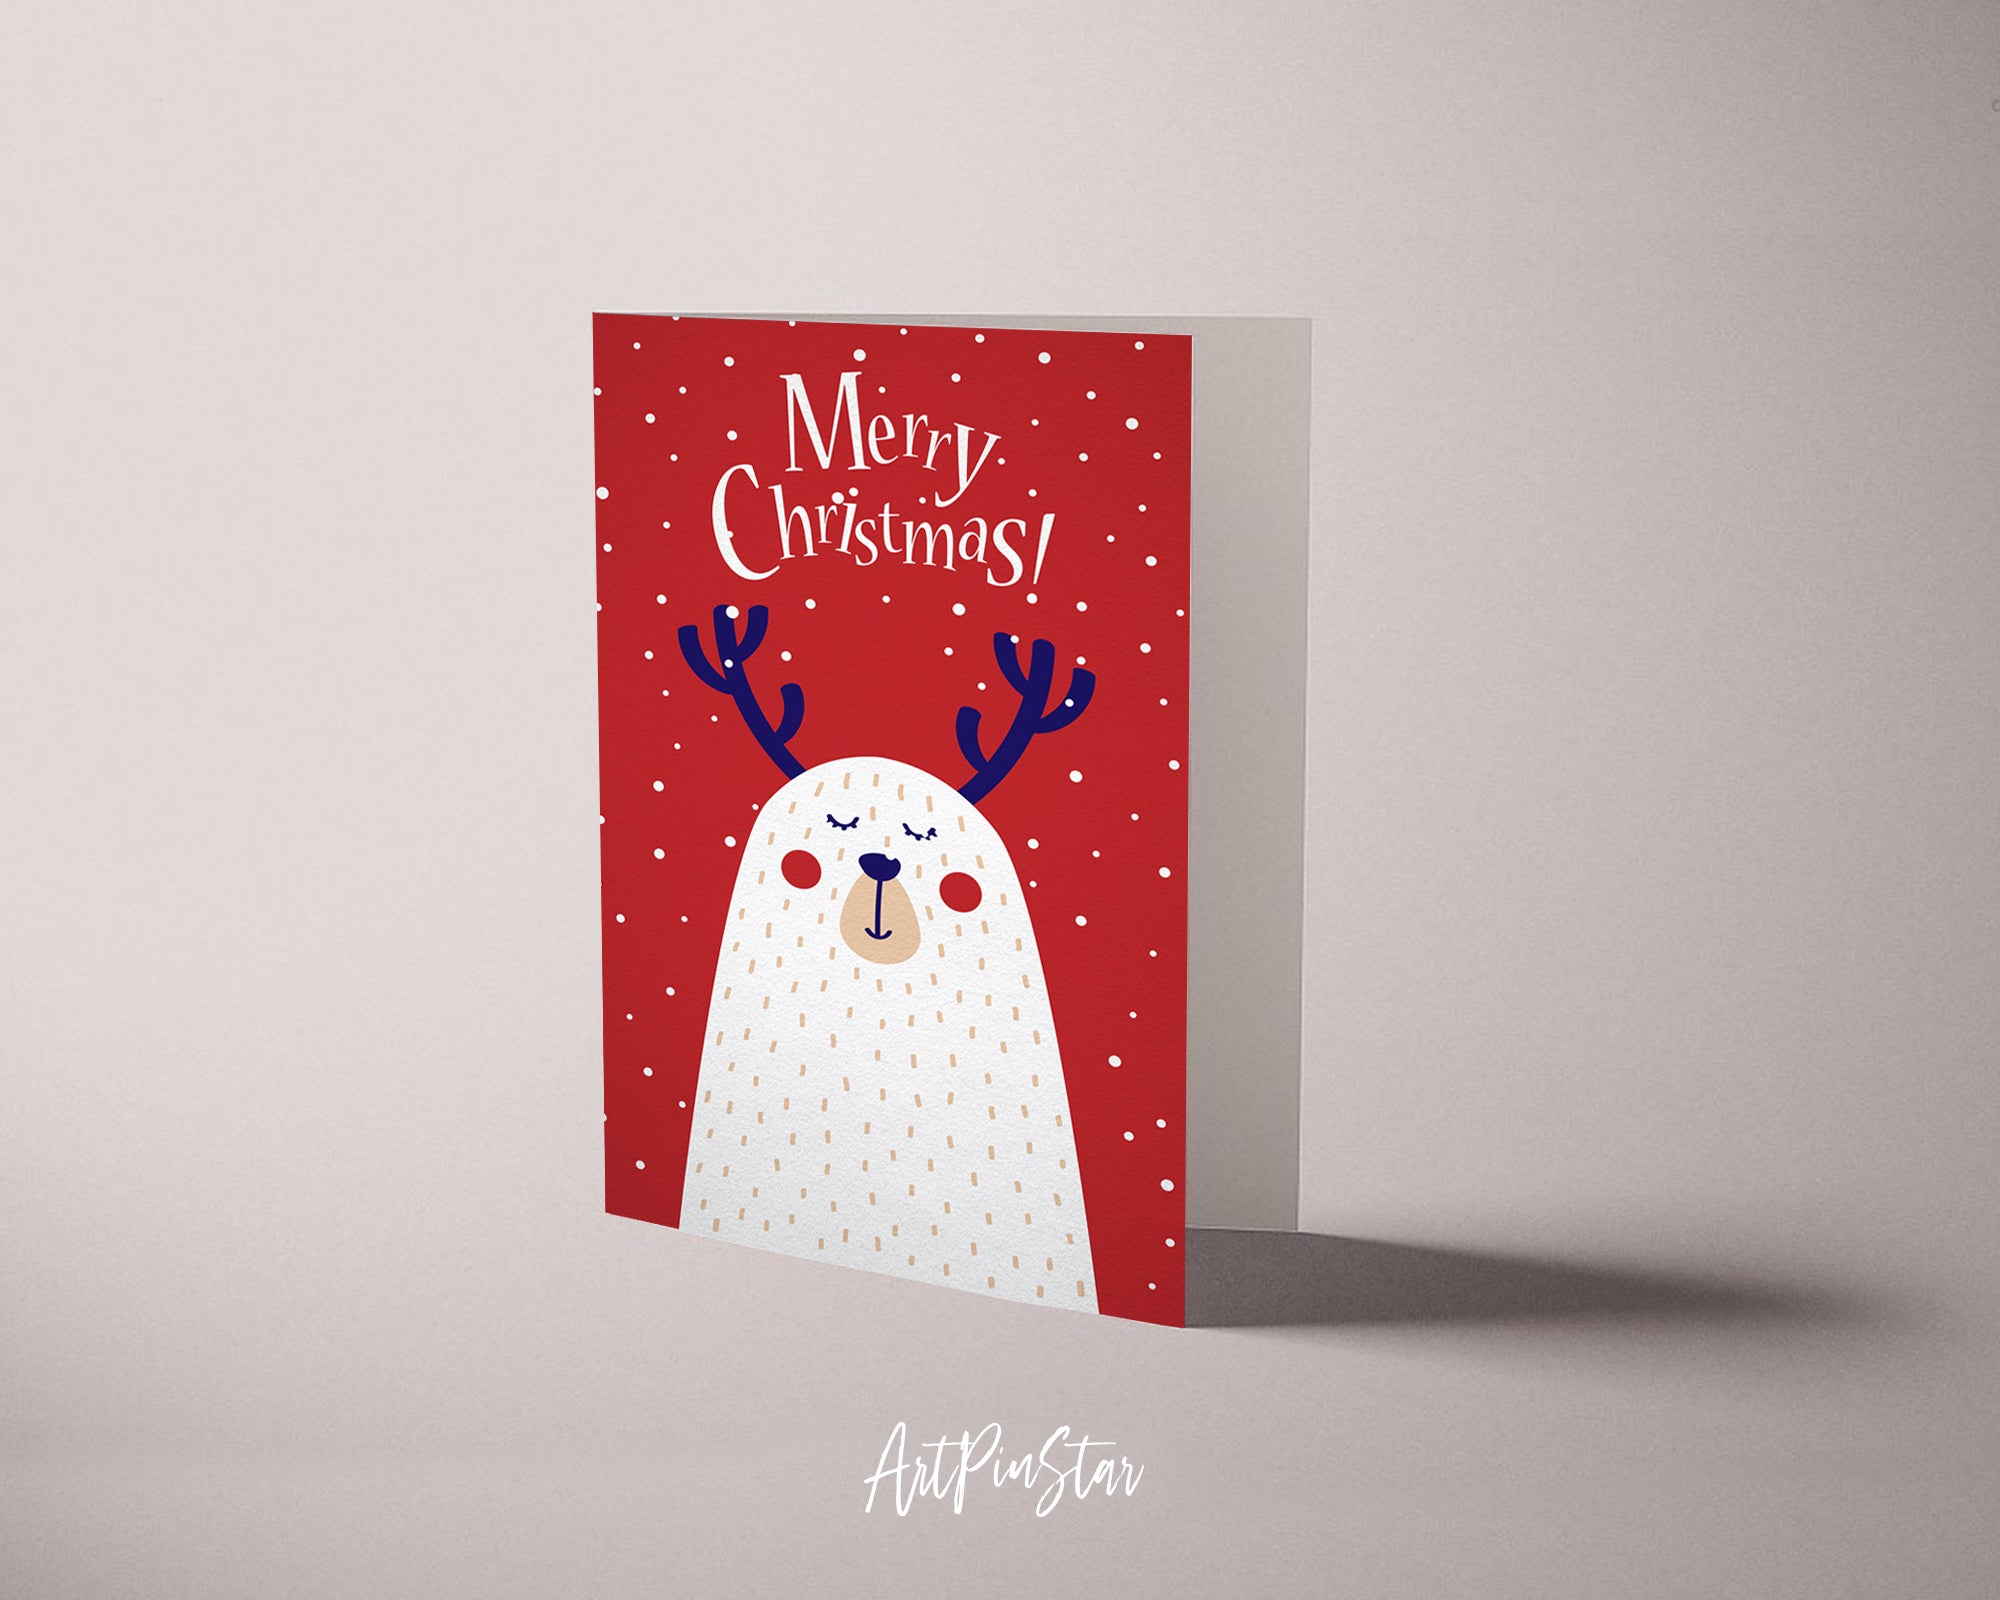 Merry Christmas-Deer Personalized Holiday Greeting Card Gifts